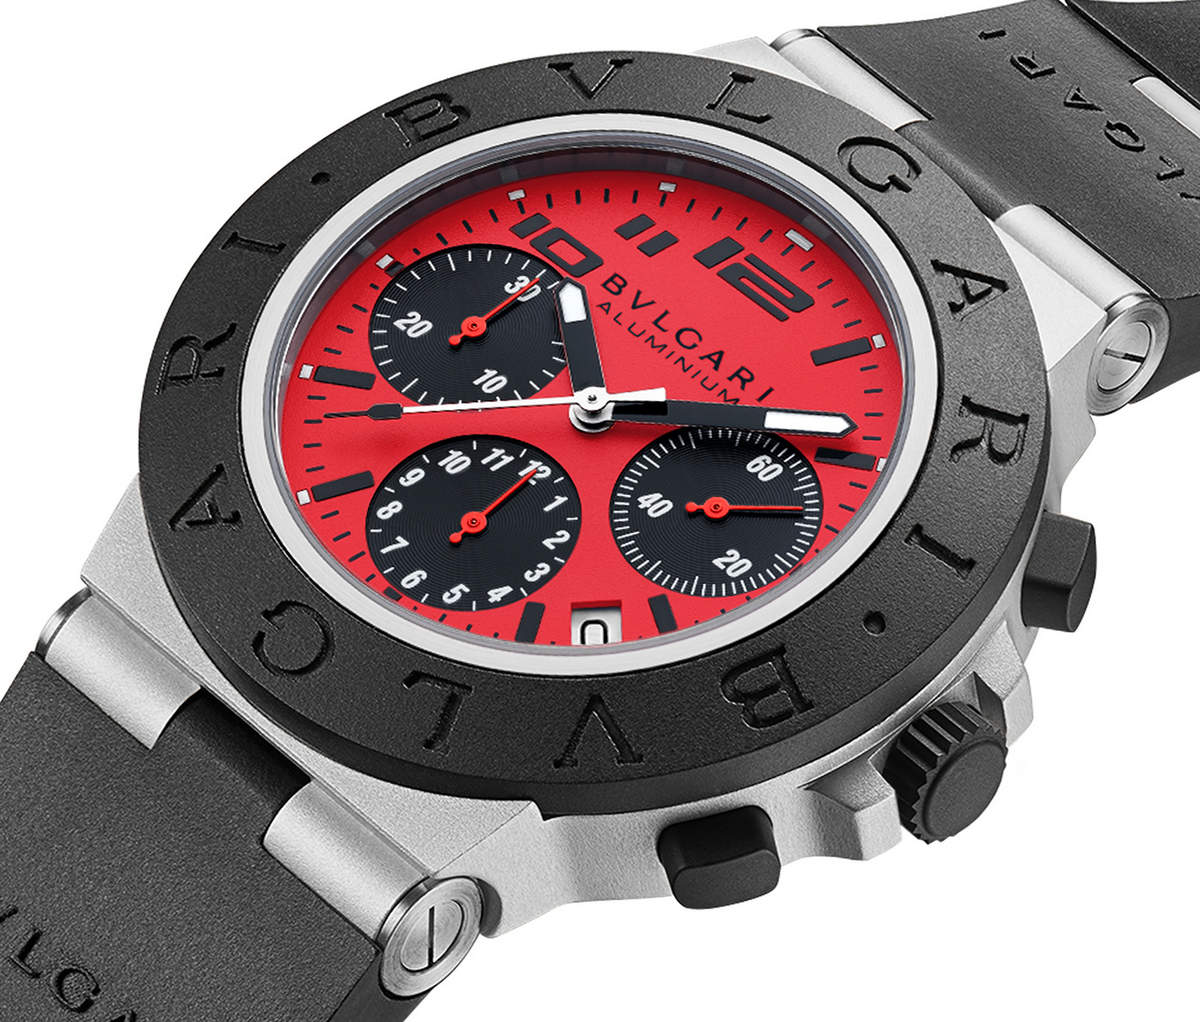 Bulgari has collaborated with Ducati to launch a limited edition watch based on its sporty aluminum chronograph